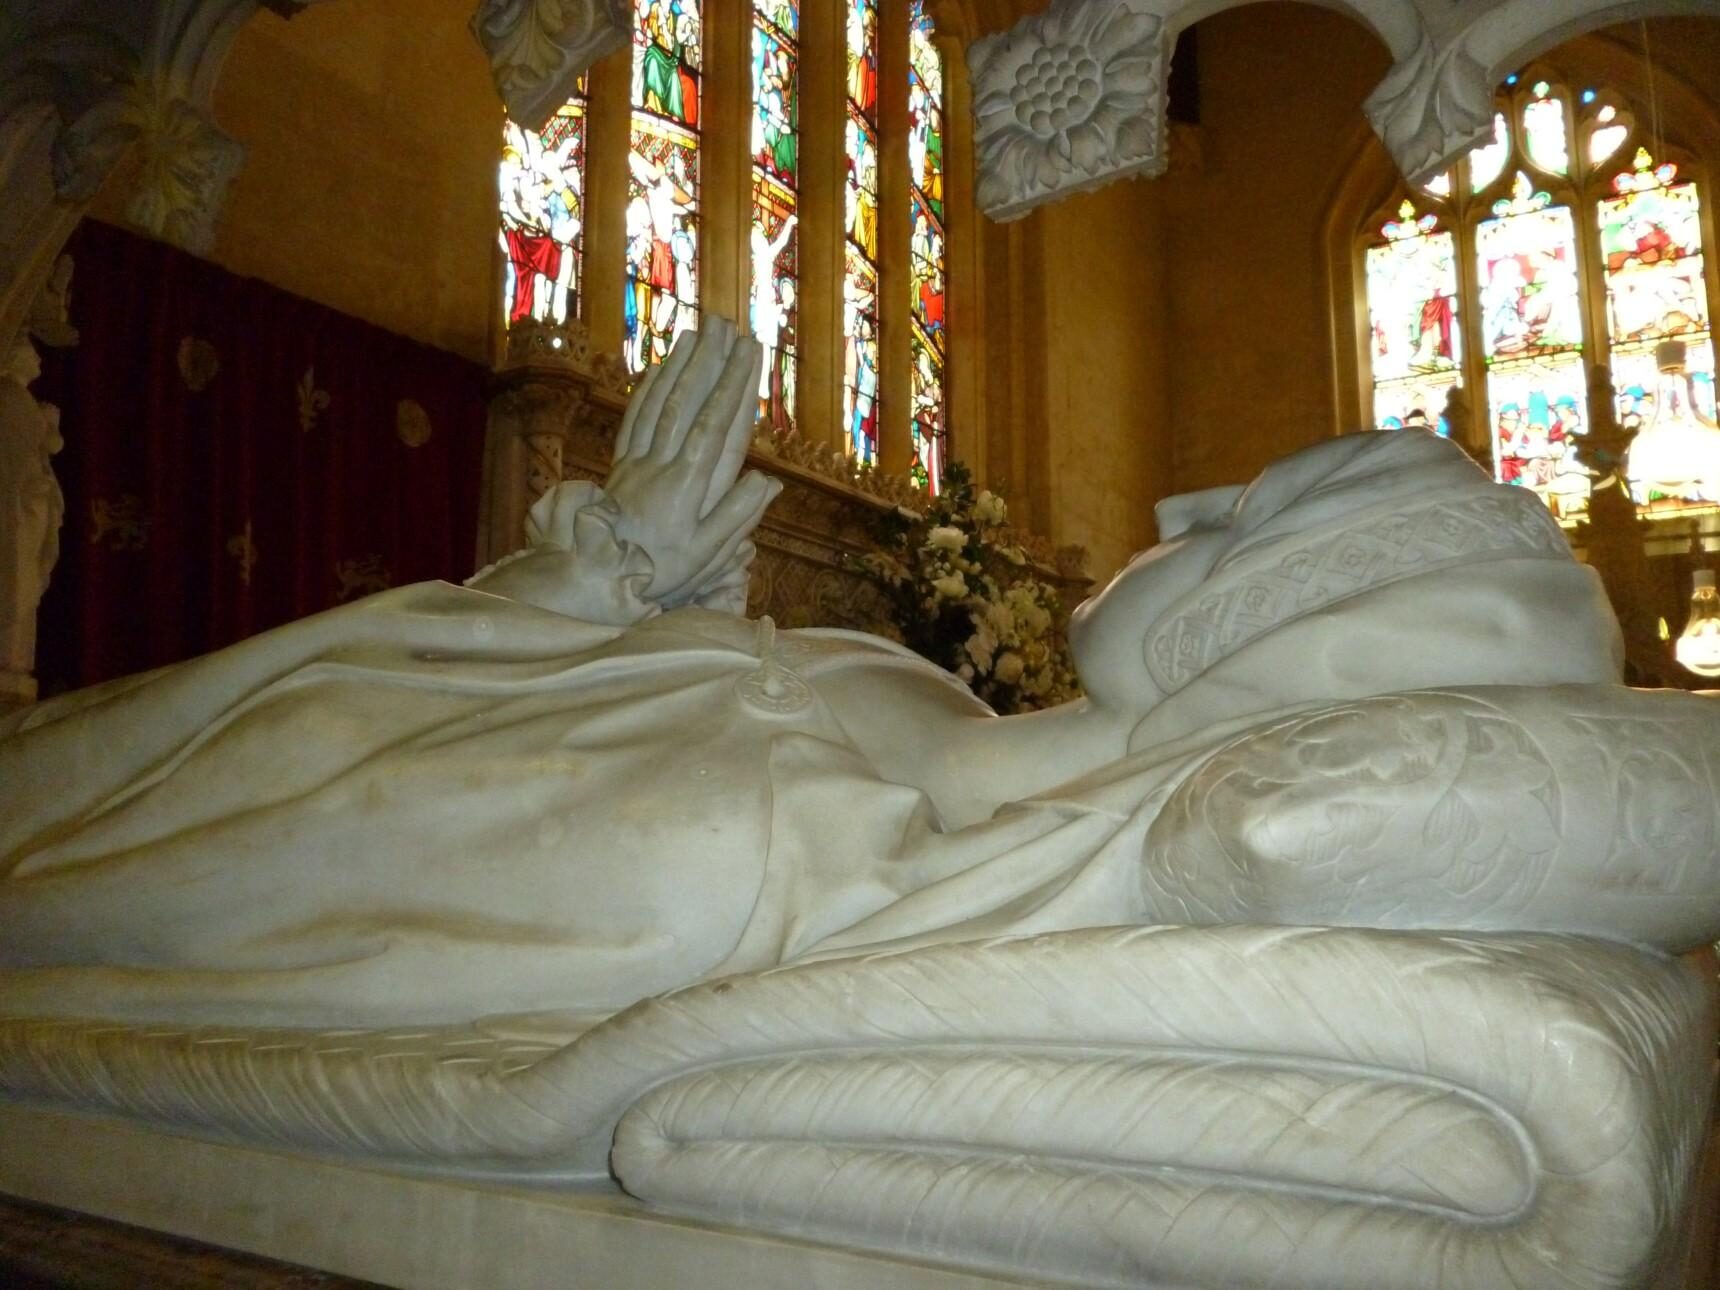 Tomb of Katherine Parr